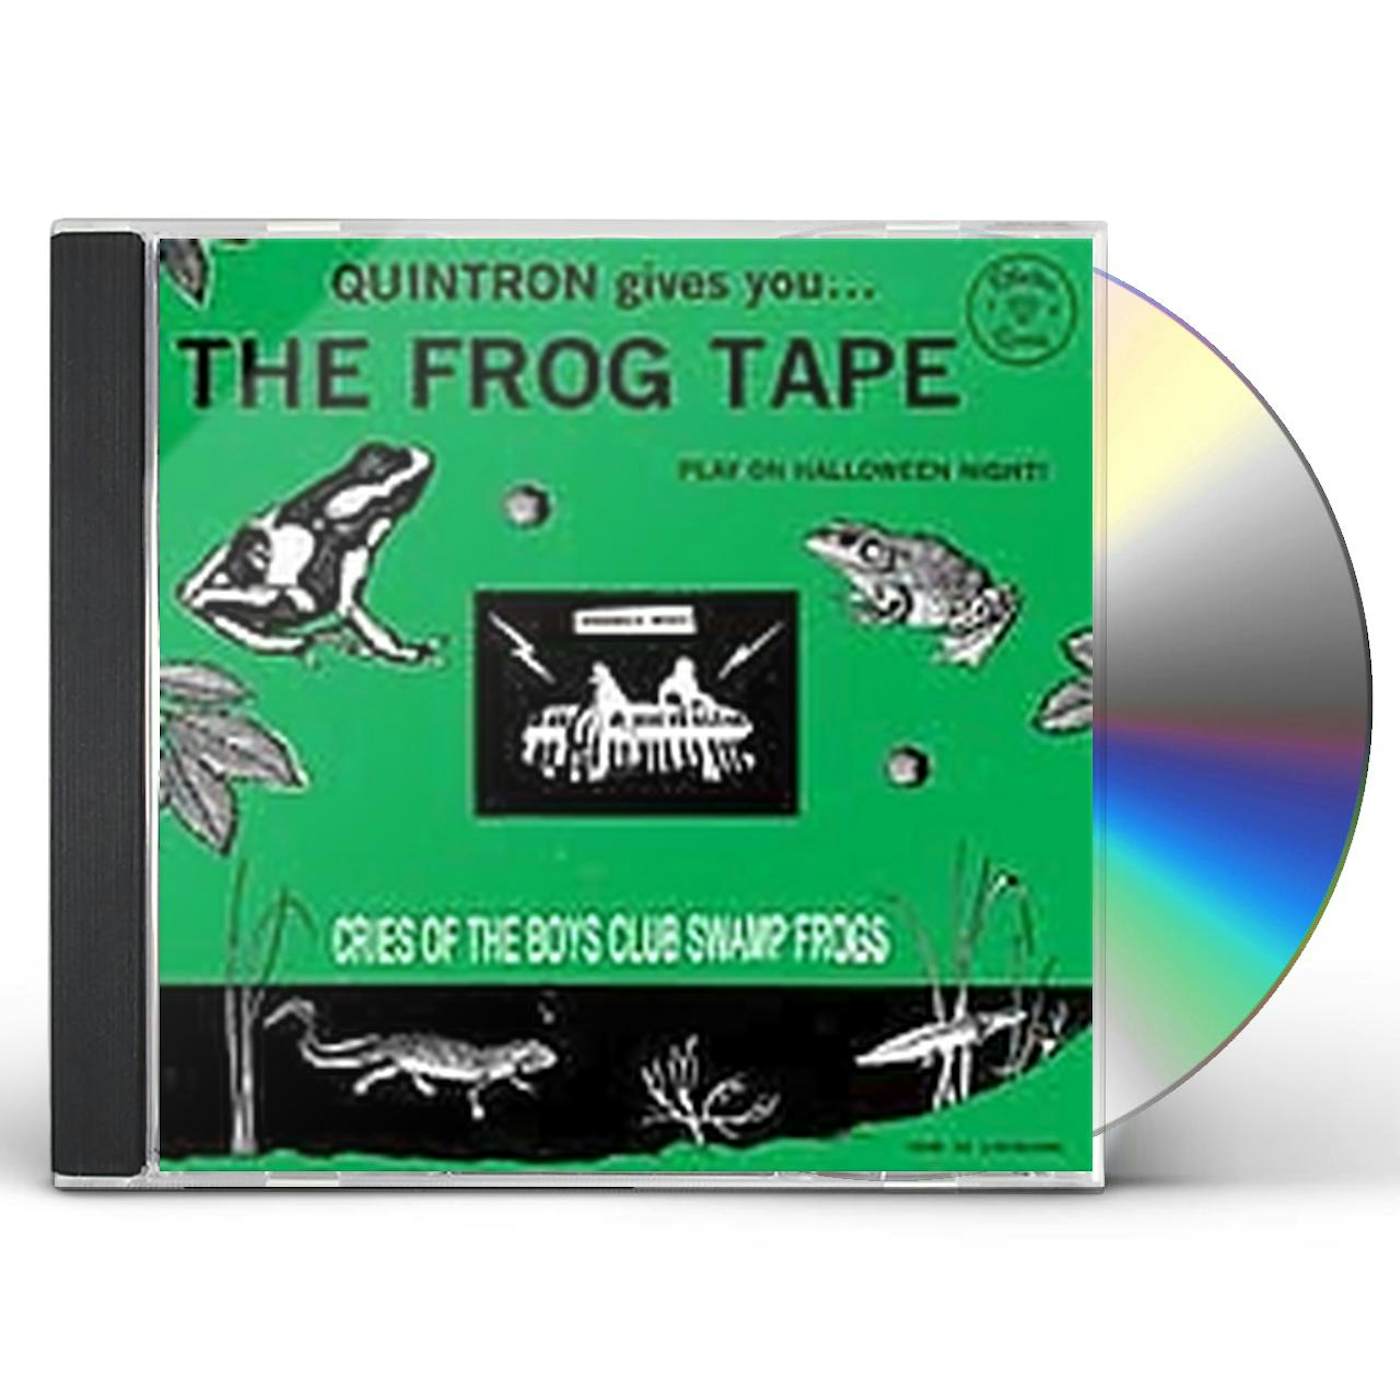 Quintron FROG TAPE CD